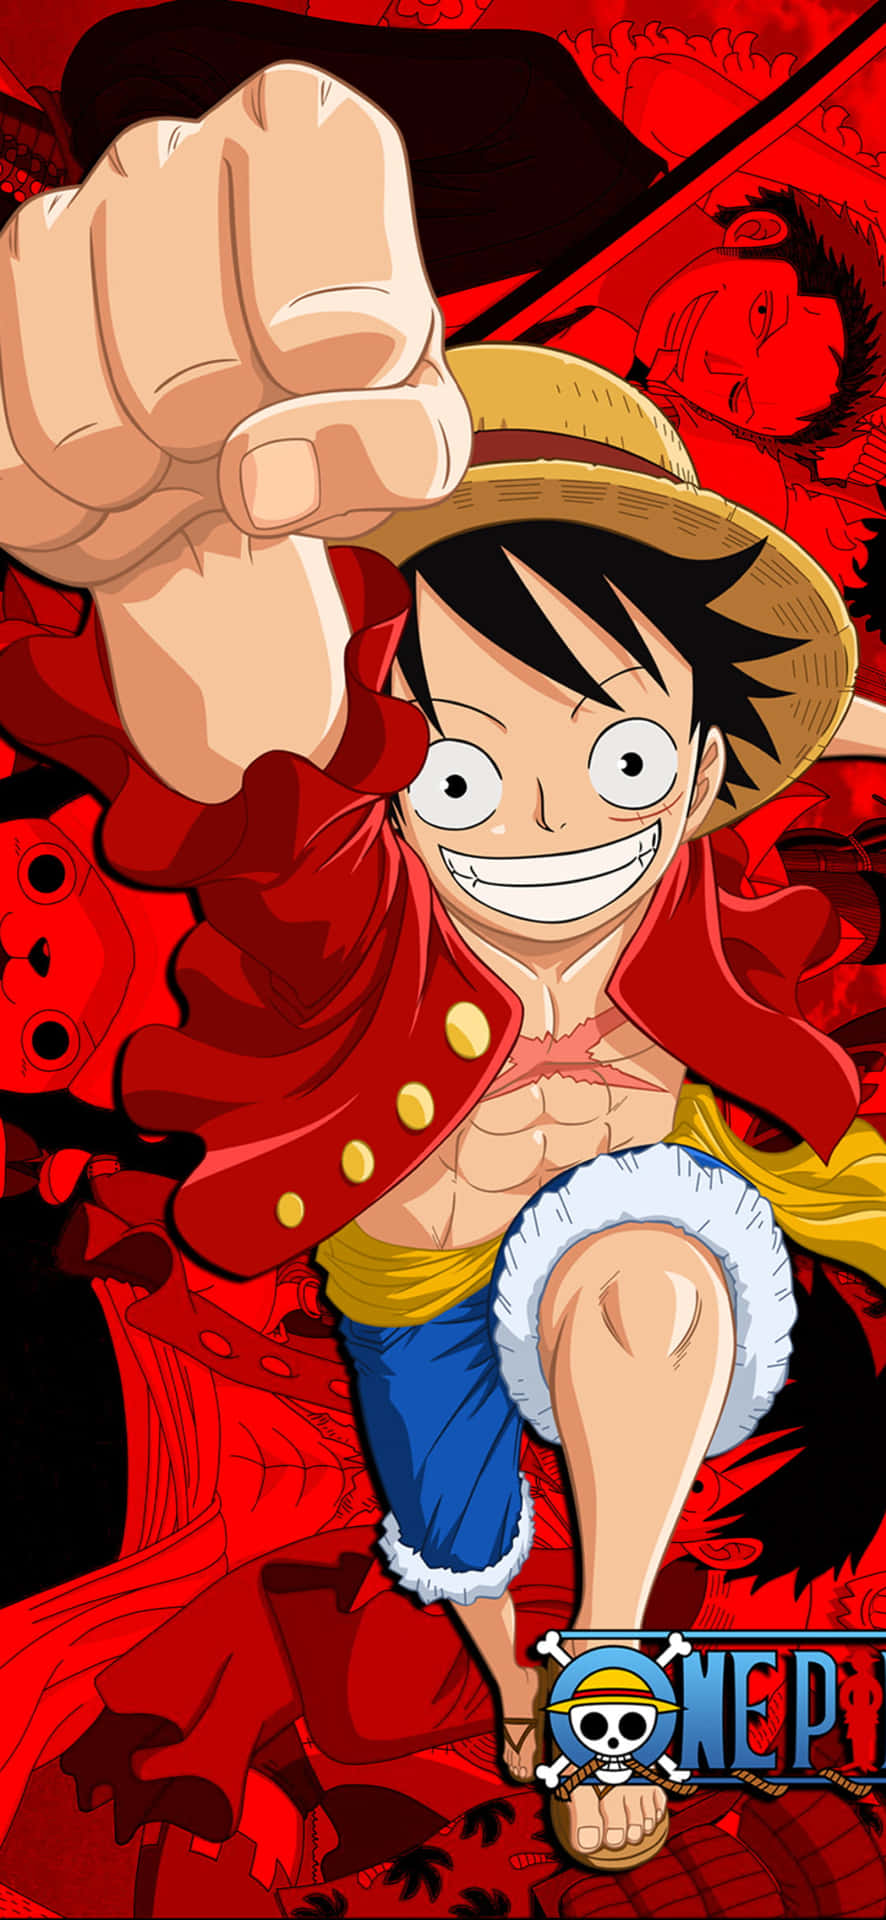 One Piece - Monkey D Luffy at the forest 4K wallpaper download